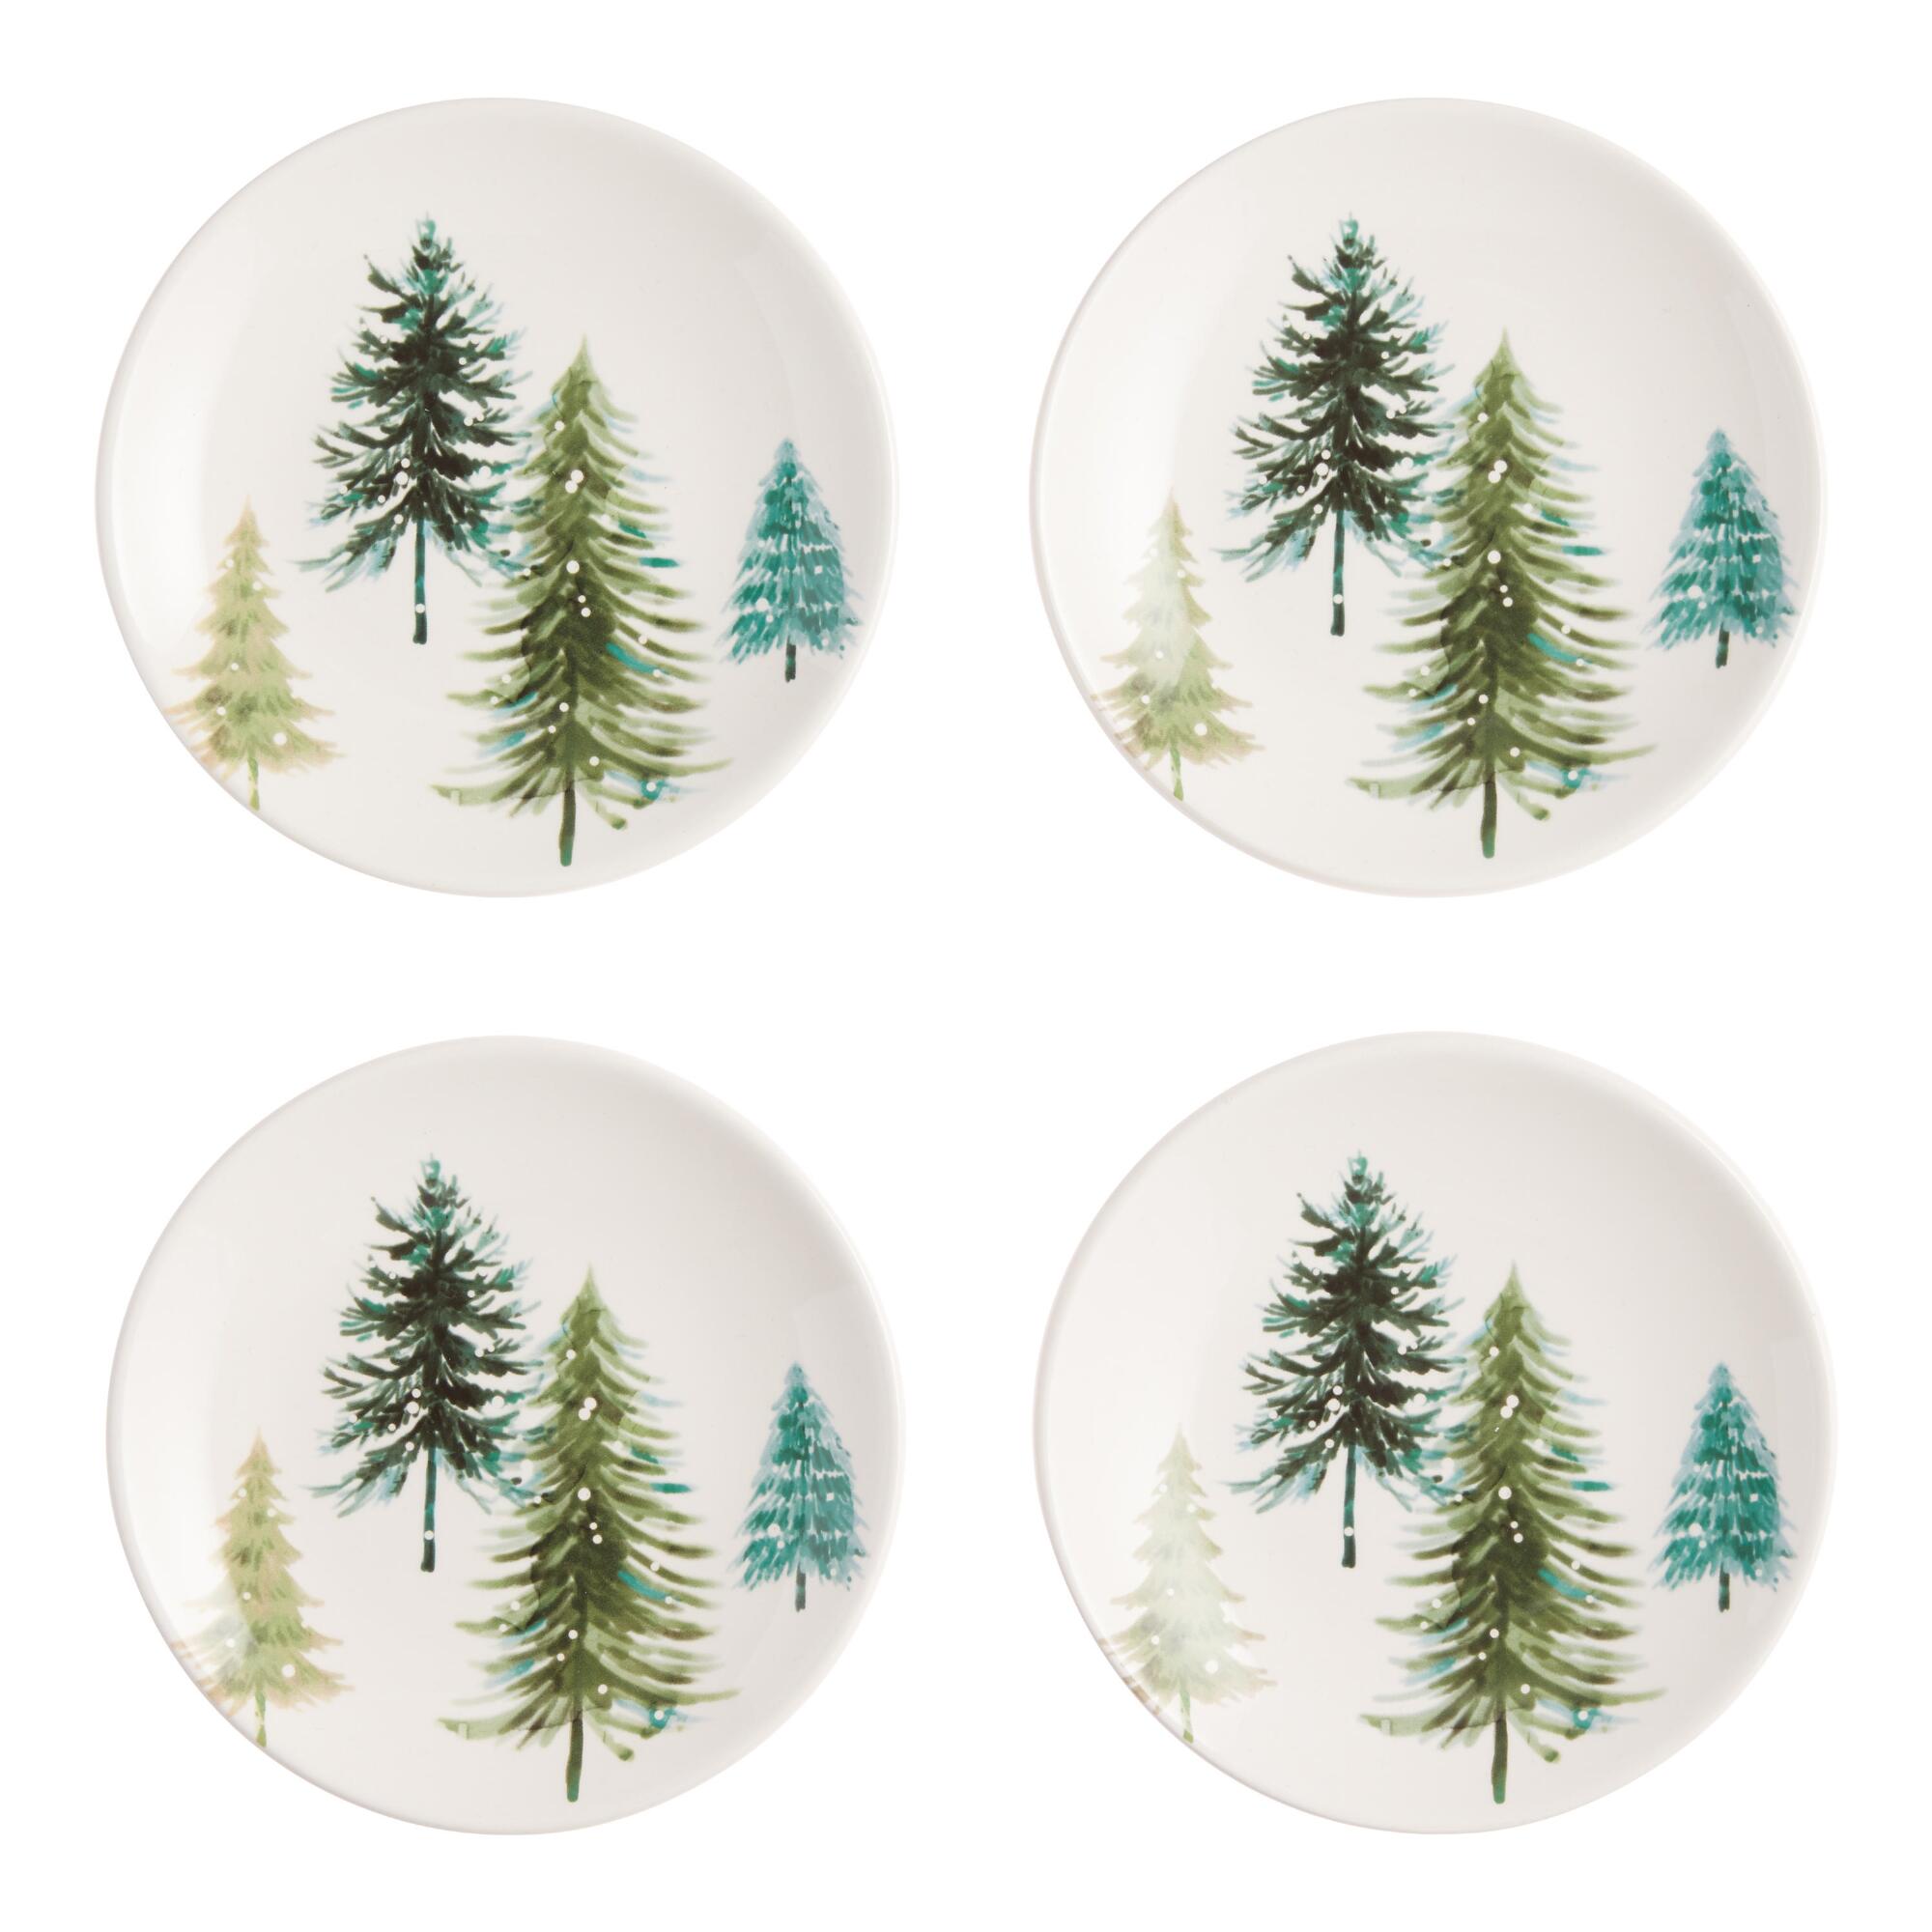 Pier Place Snowy Spruce Appetizer Plates 4 Pack: Green/White/Silver - Earthenware by World Market